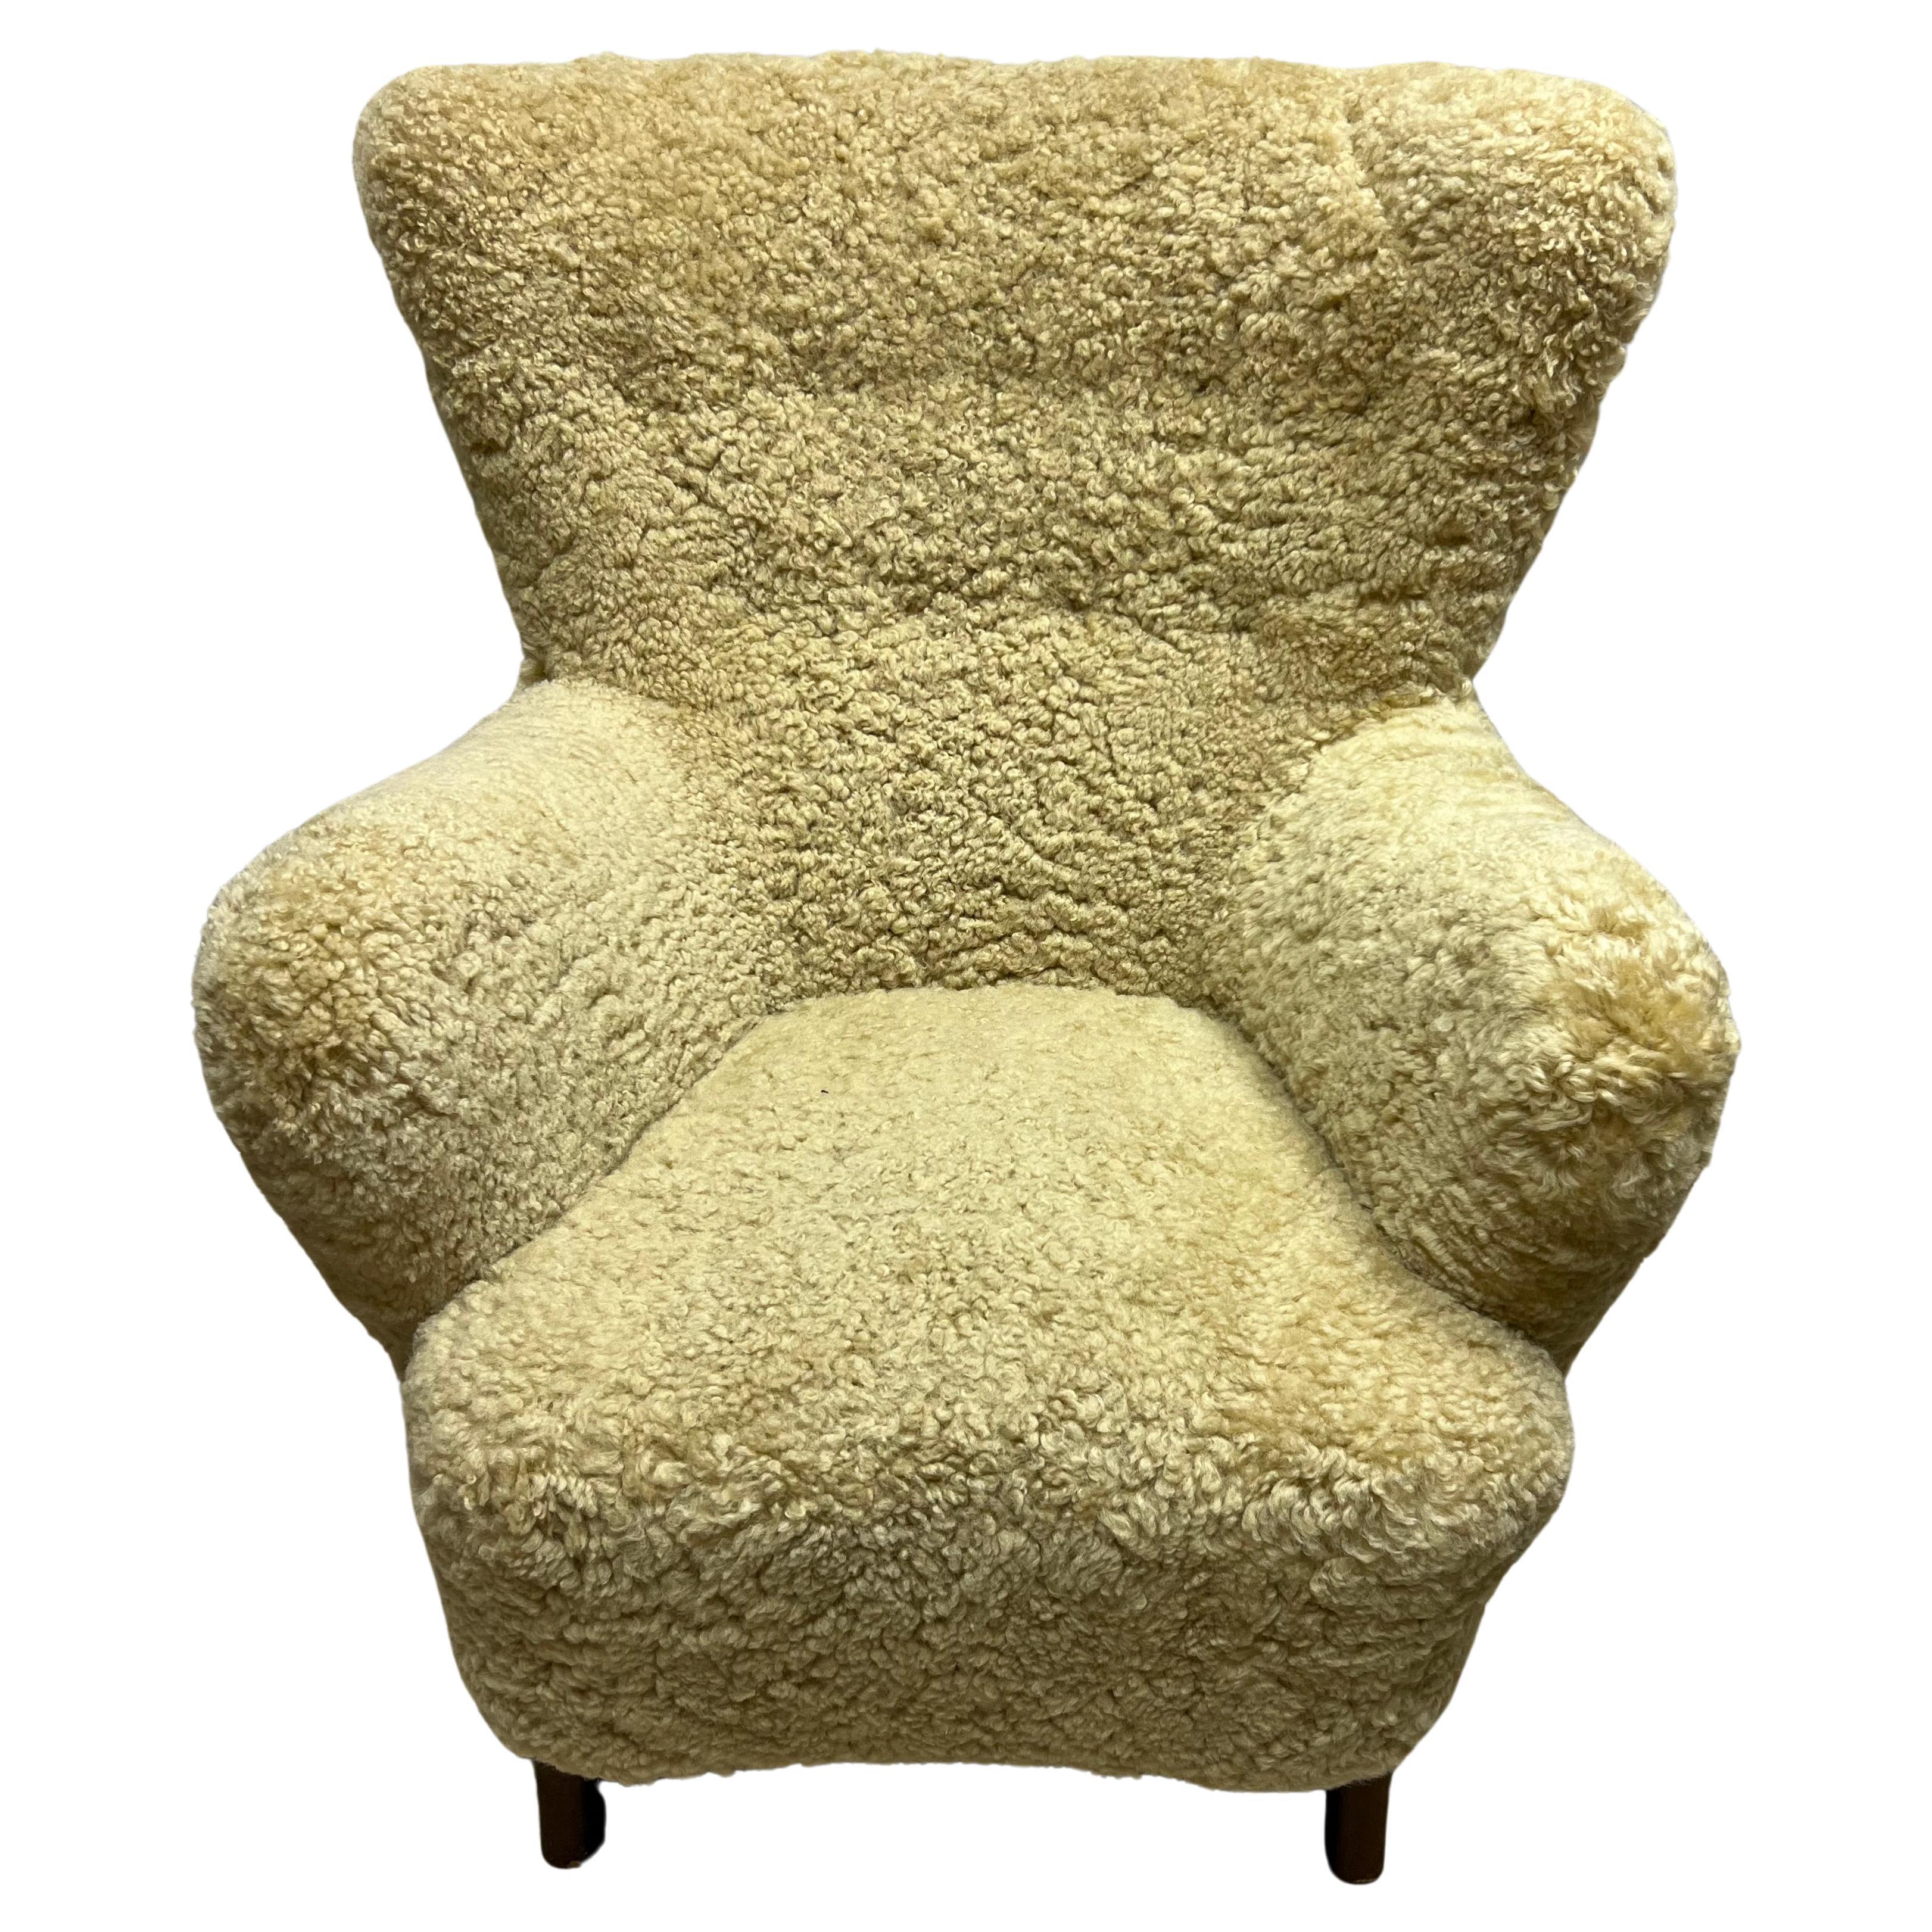 Pair of Shearling Chairs by Alfred Christensen, Denmark circa 1950 For Sale 2